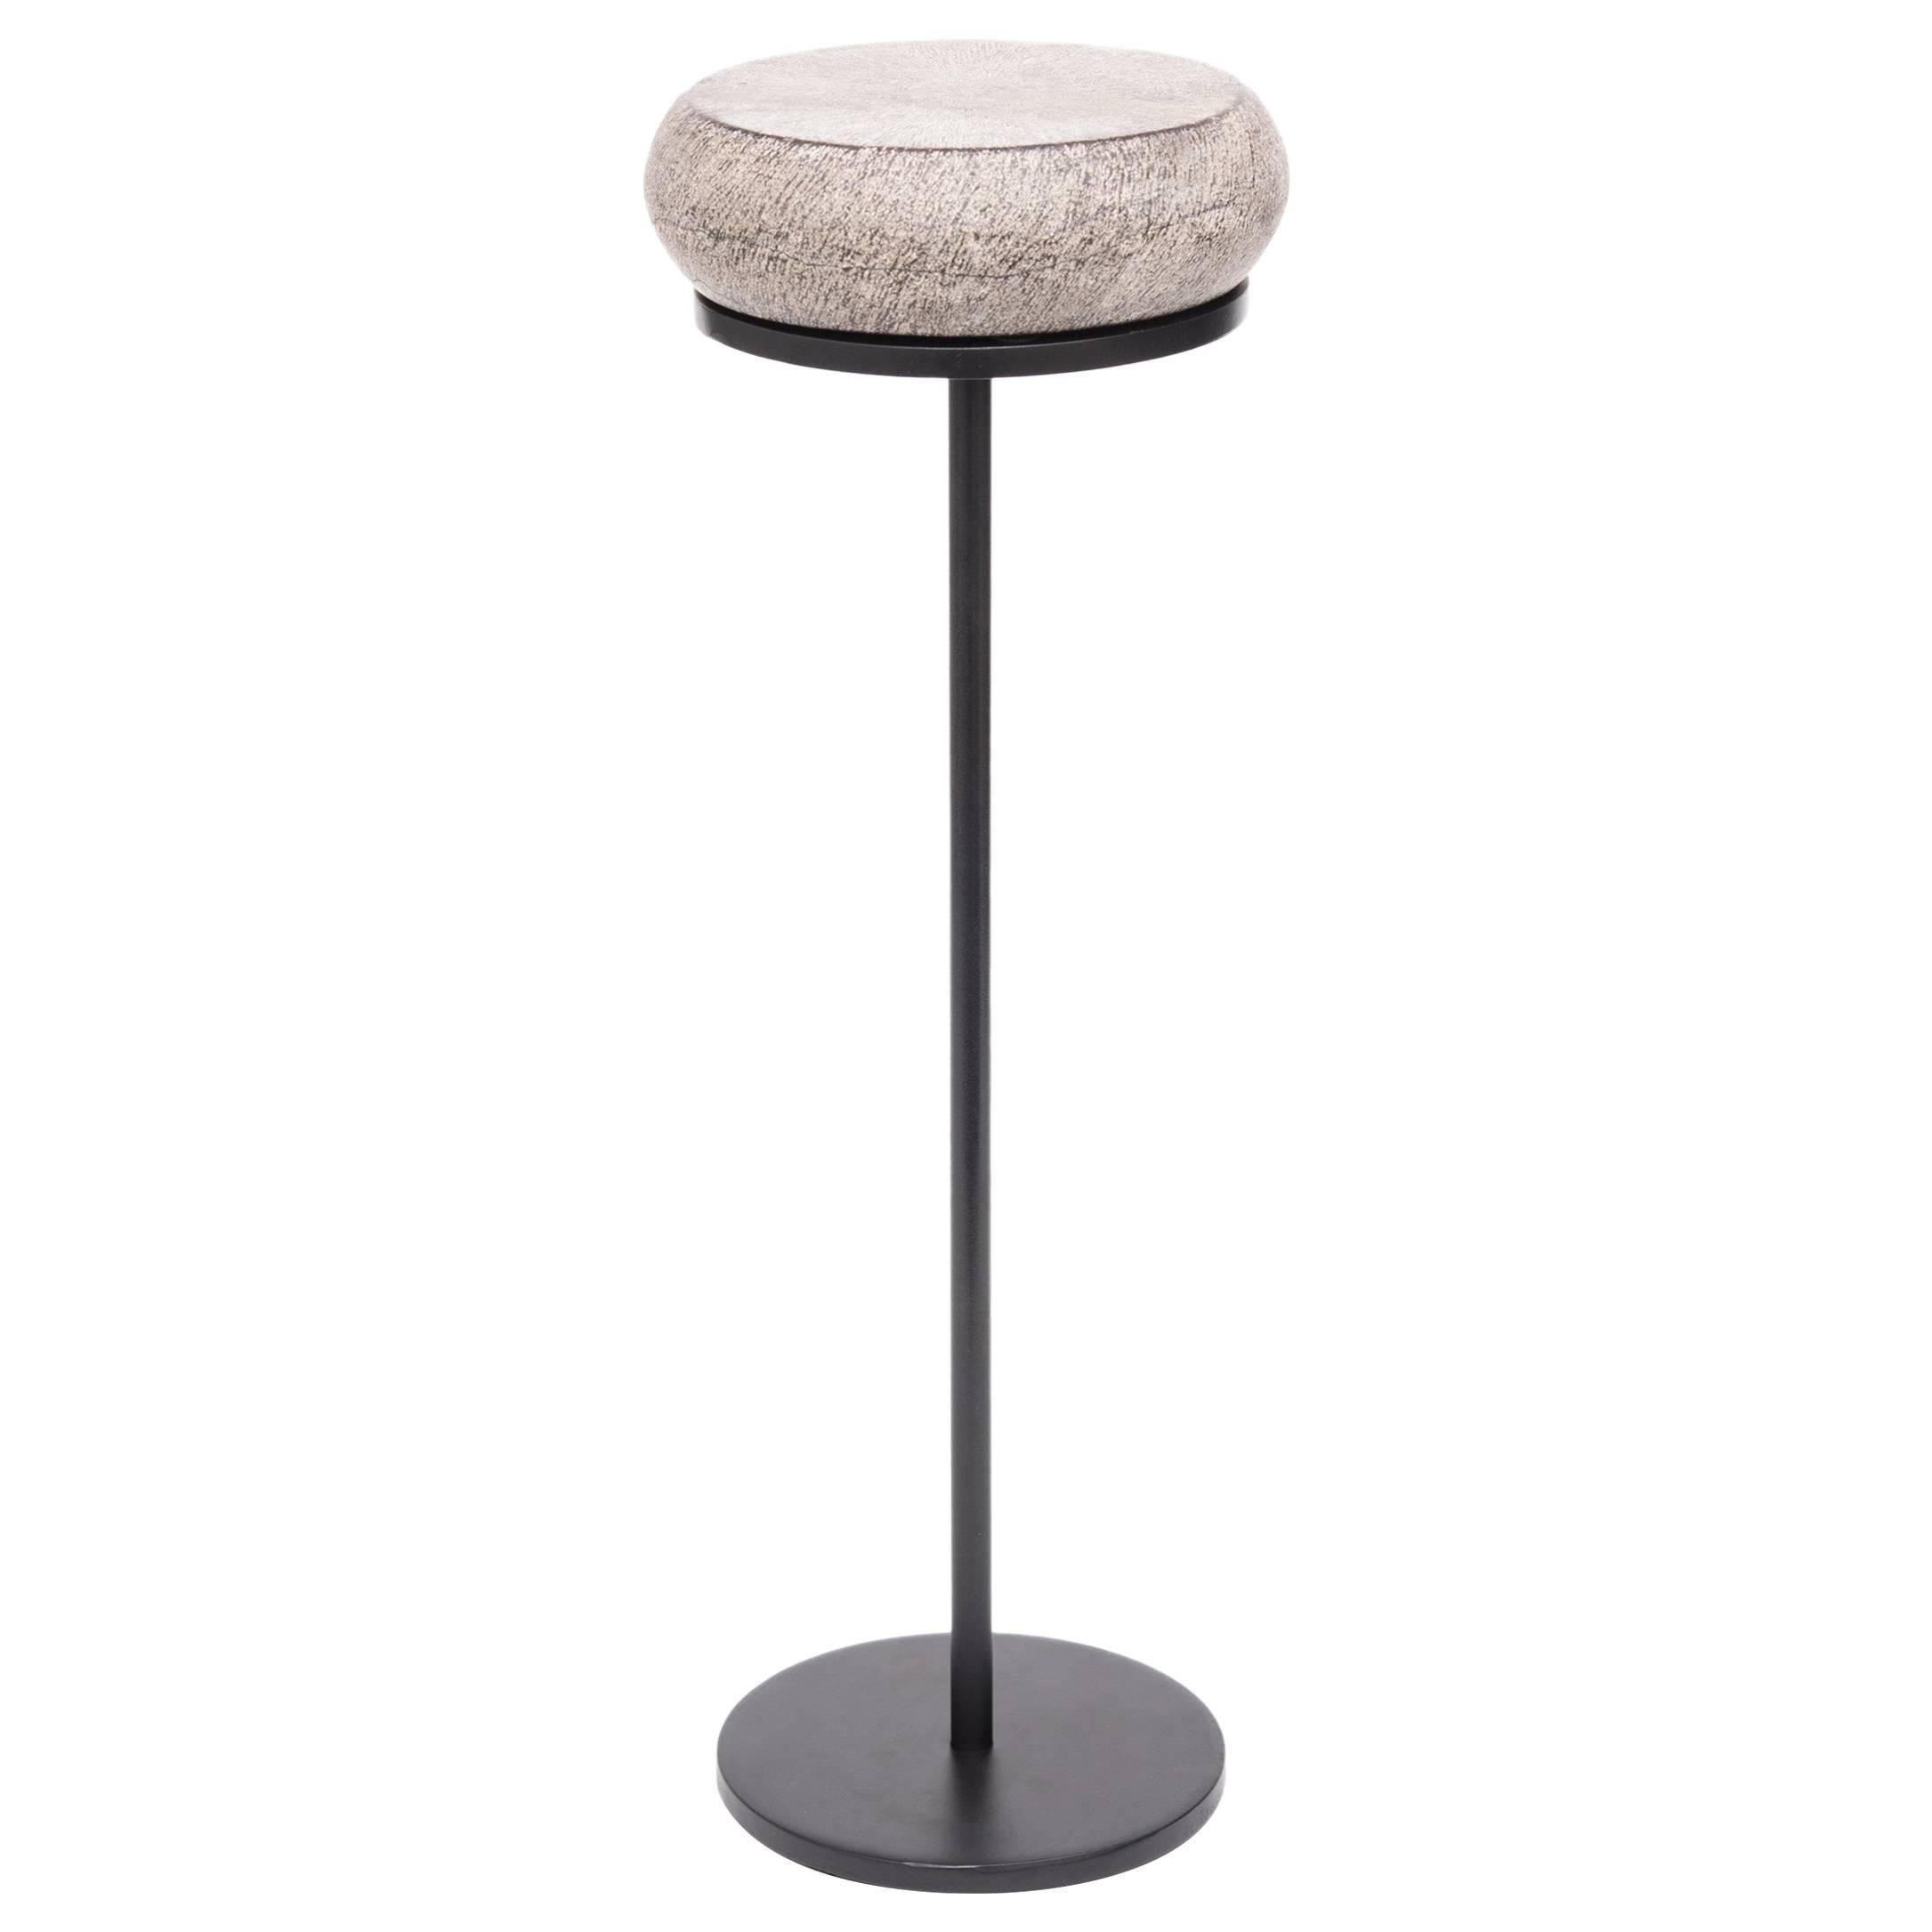 Chinese Petite Stone Drum Table